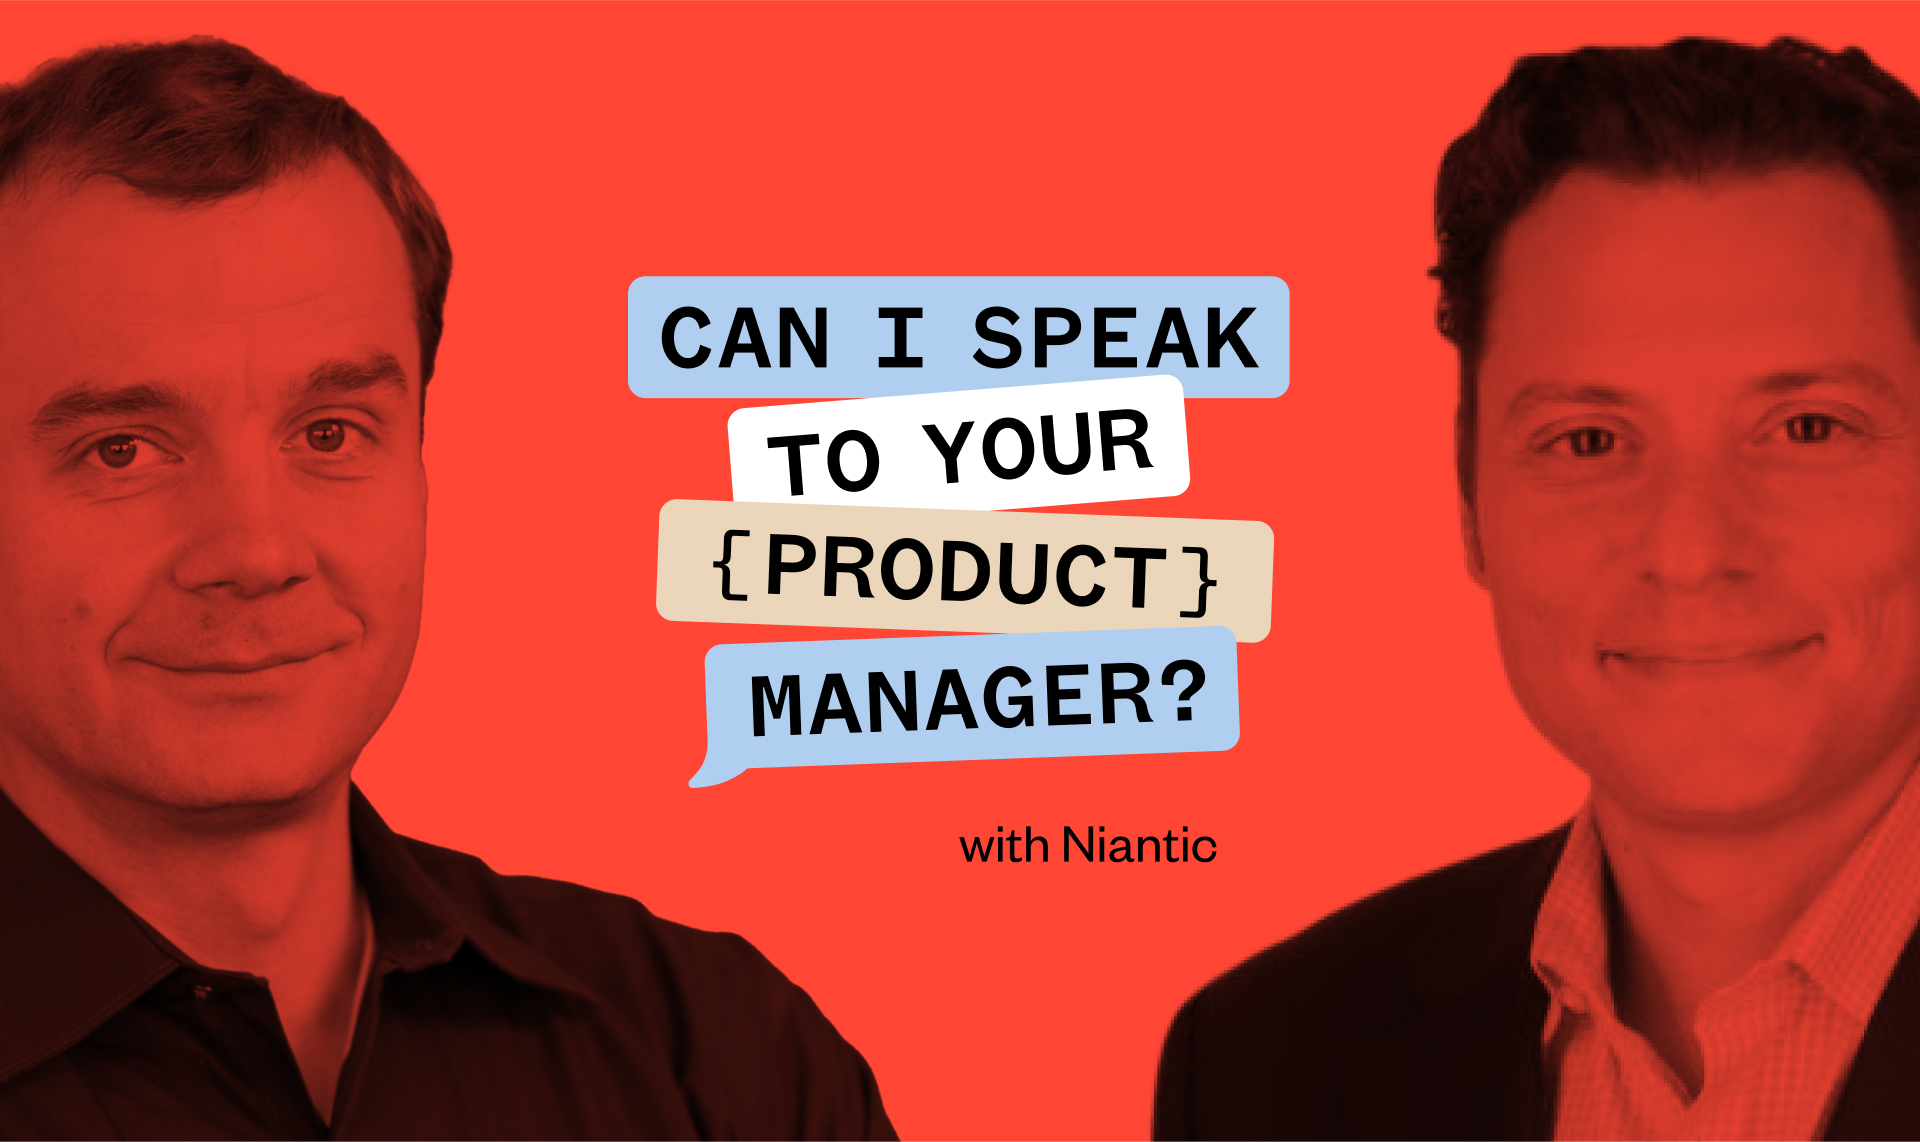 Two individuals stand in front of a red background with a speech bubble reading "Can I speak to your {Product} manager? with Niantic.